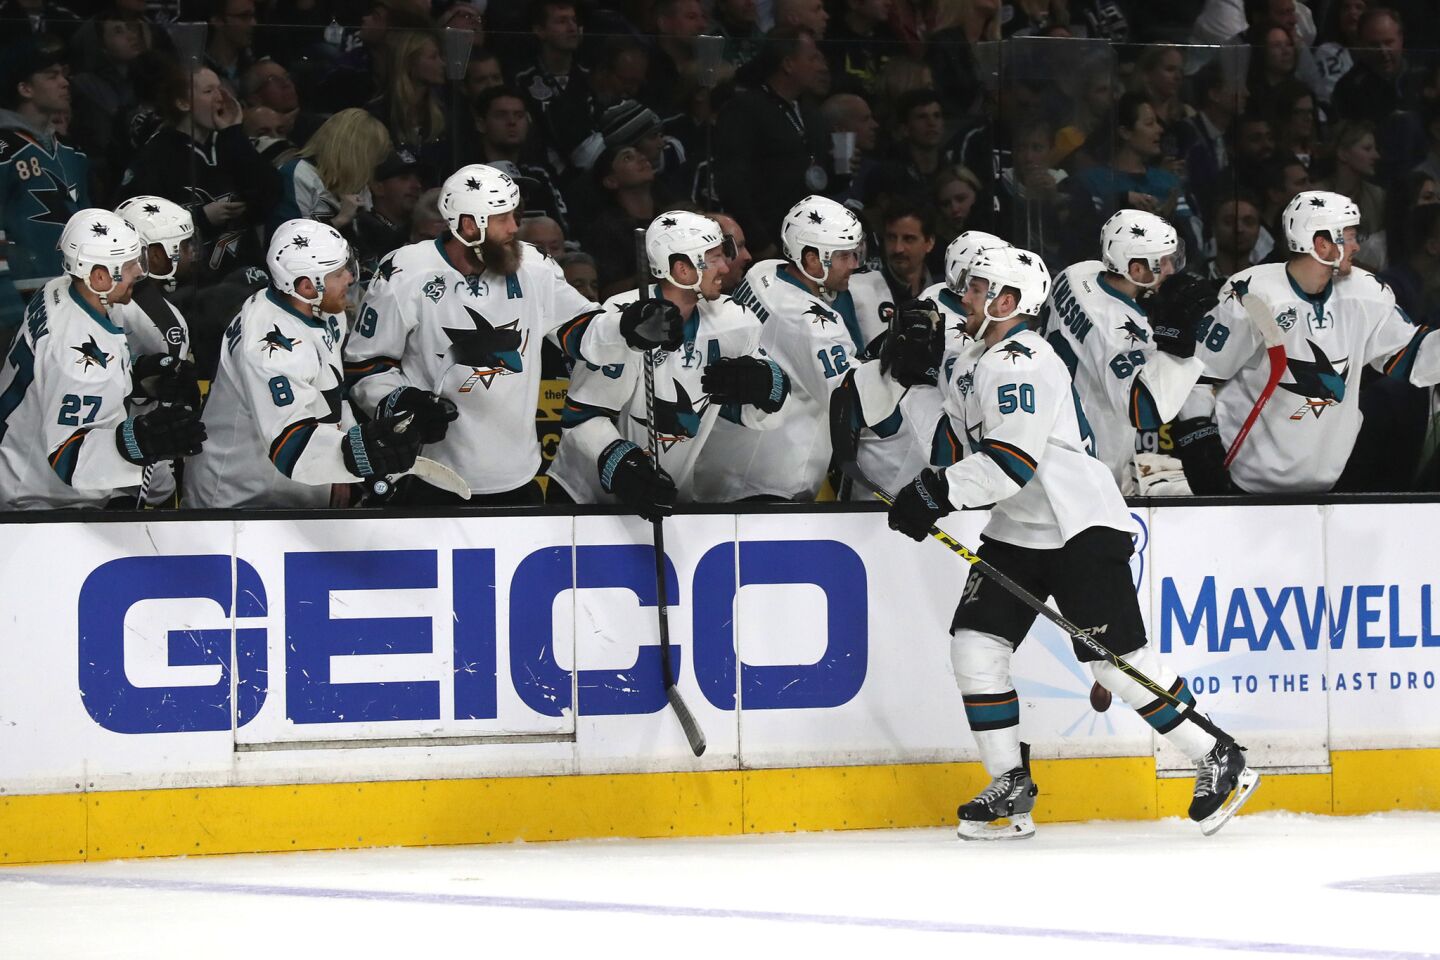 Sharks forward Chris Tierney high fives teammates after scoring a first period goal against the Kings in Game 5 of the first round playoff series on April 22.